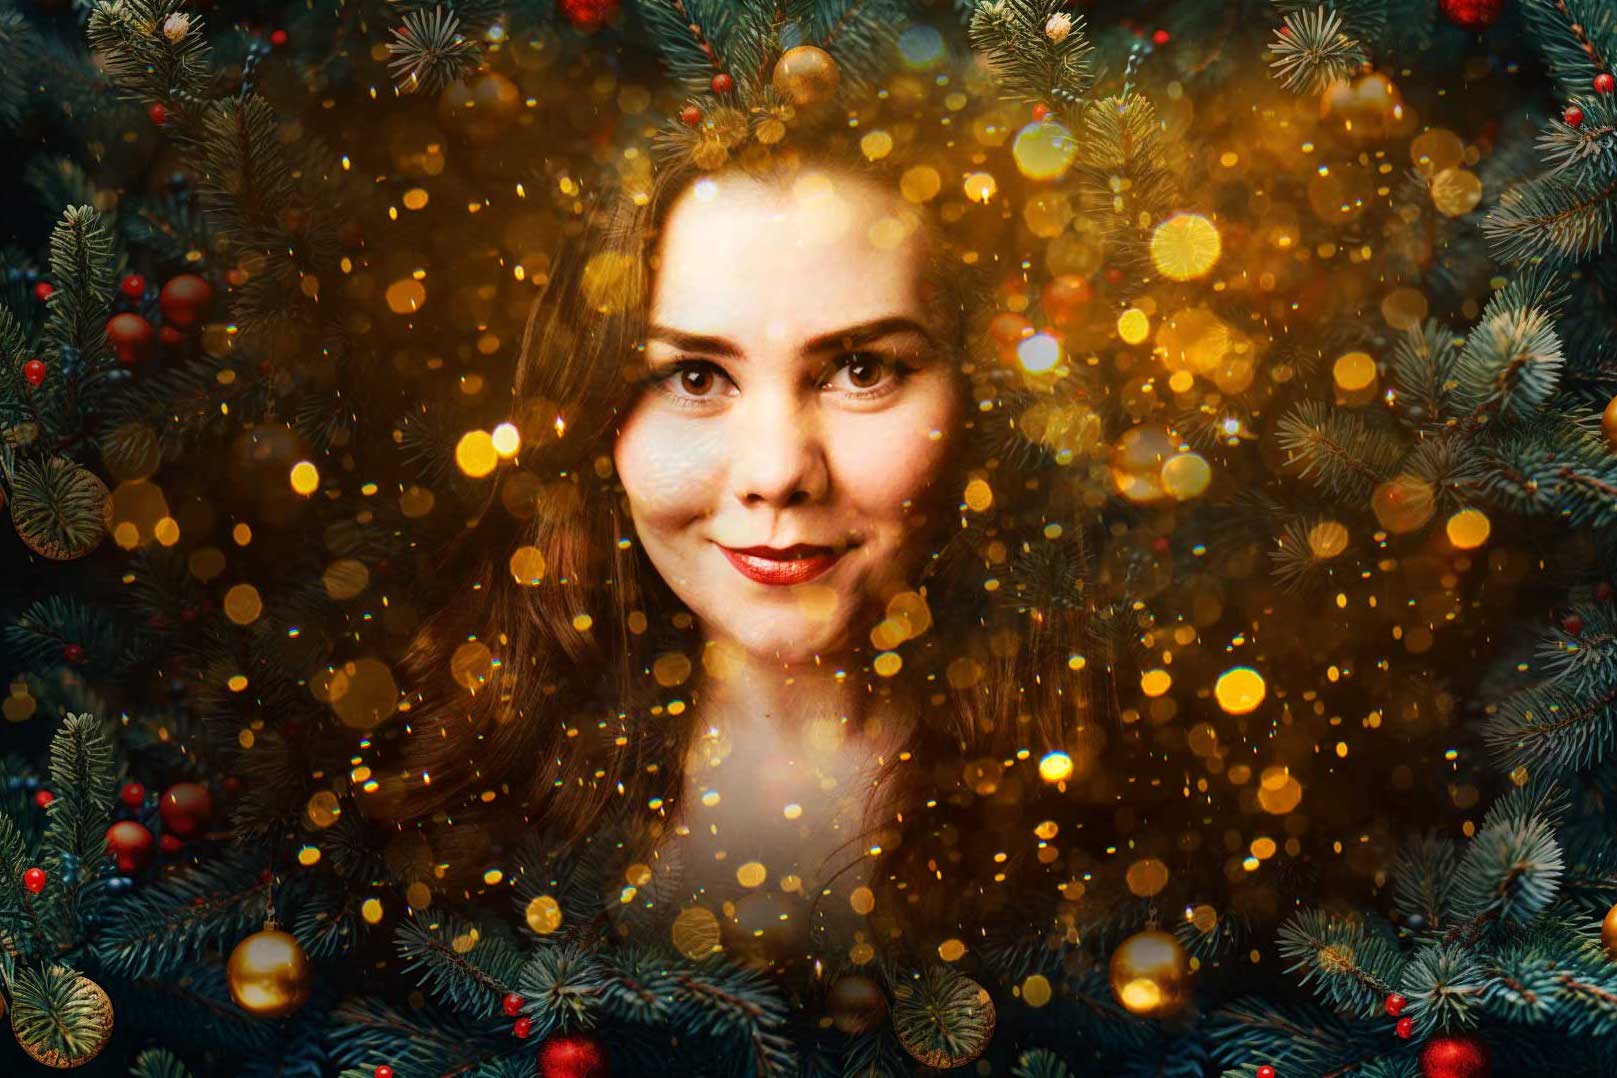 A smiling woman's face is partly obscured by small, gold circles, all surrounded by green pine and baubles from a tree.